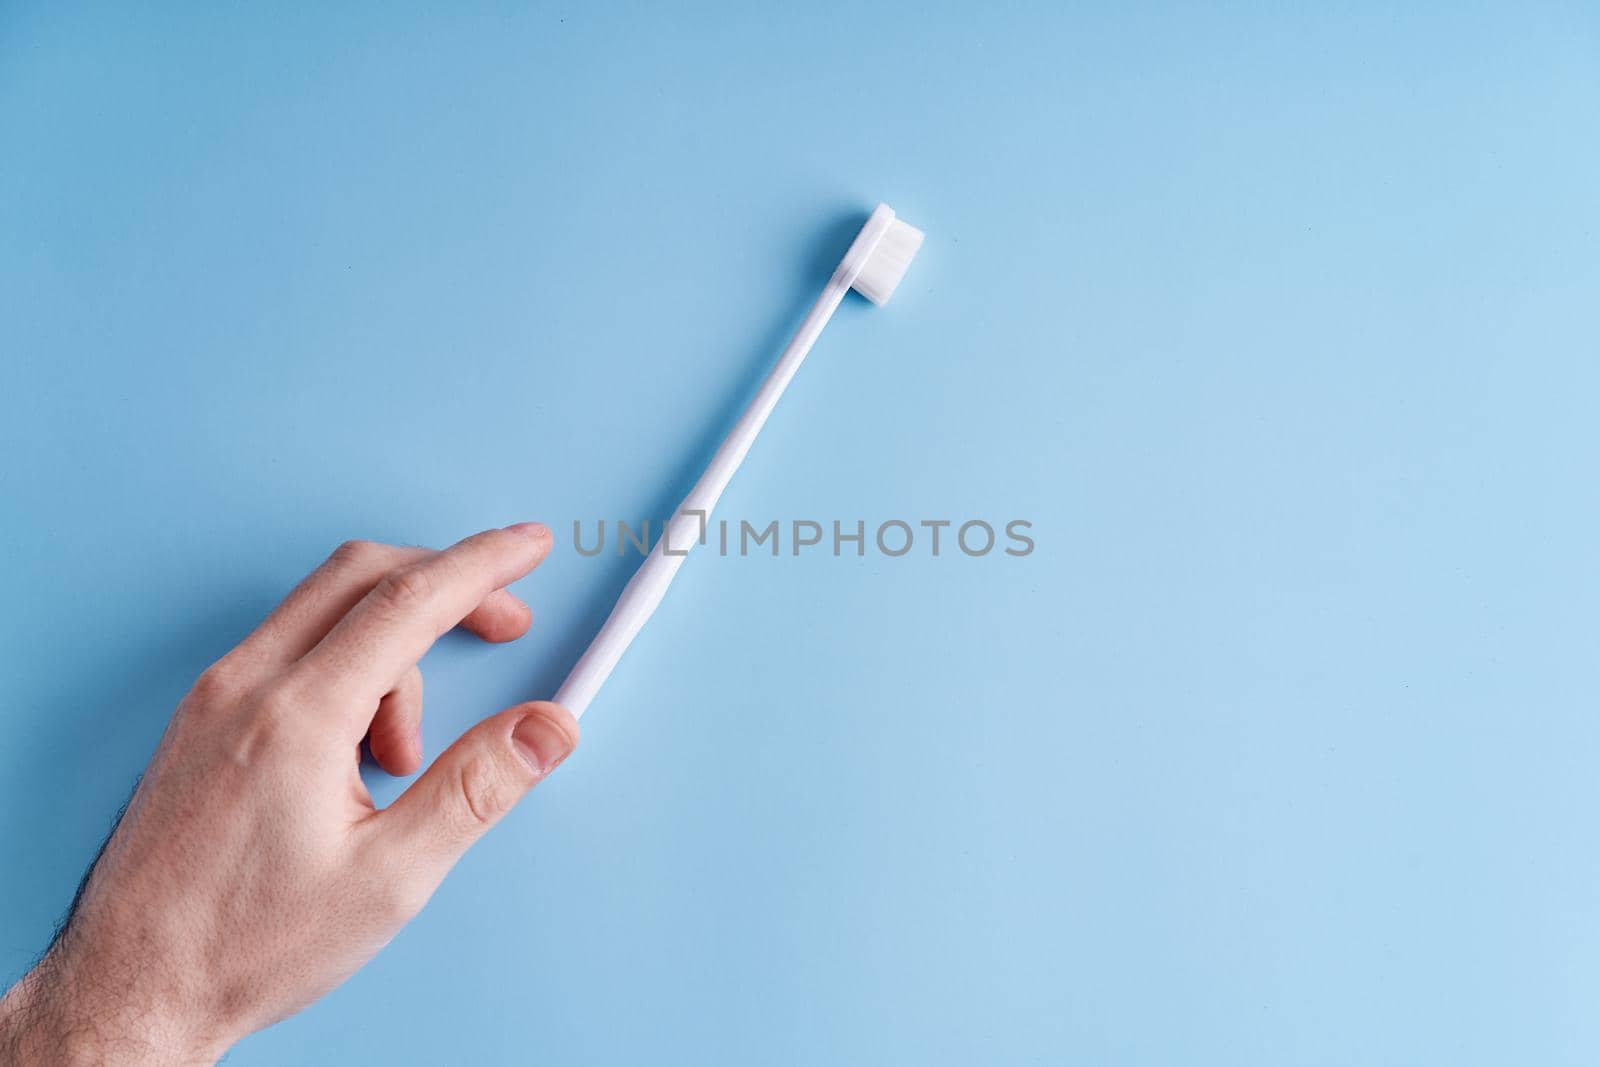 Fashionable toothbrush with soft bristles. Popular toothbrush. Hygiene trends by Try_my_best